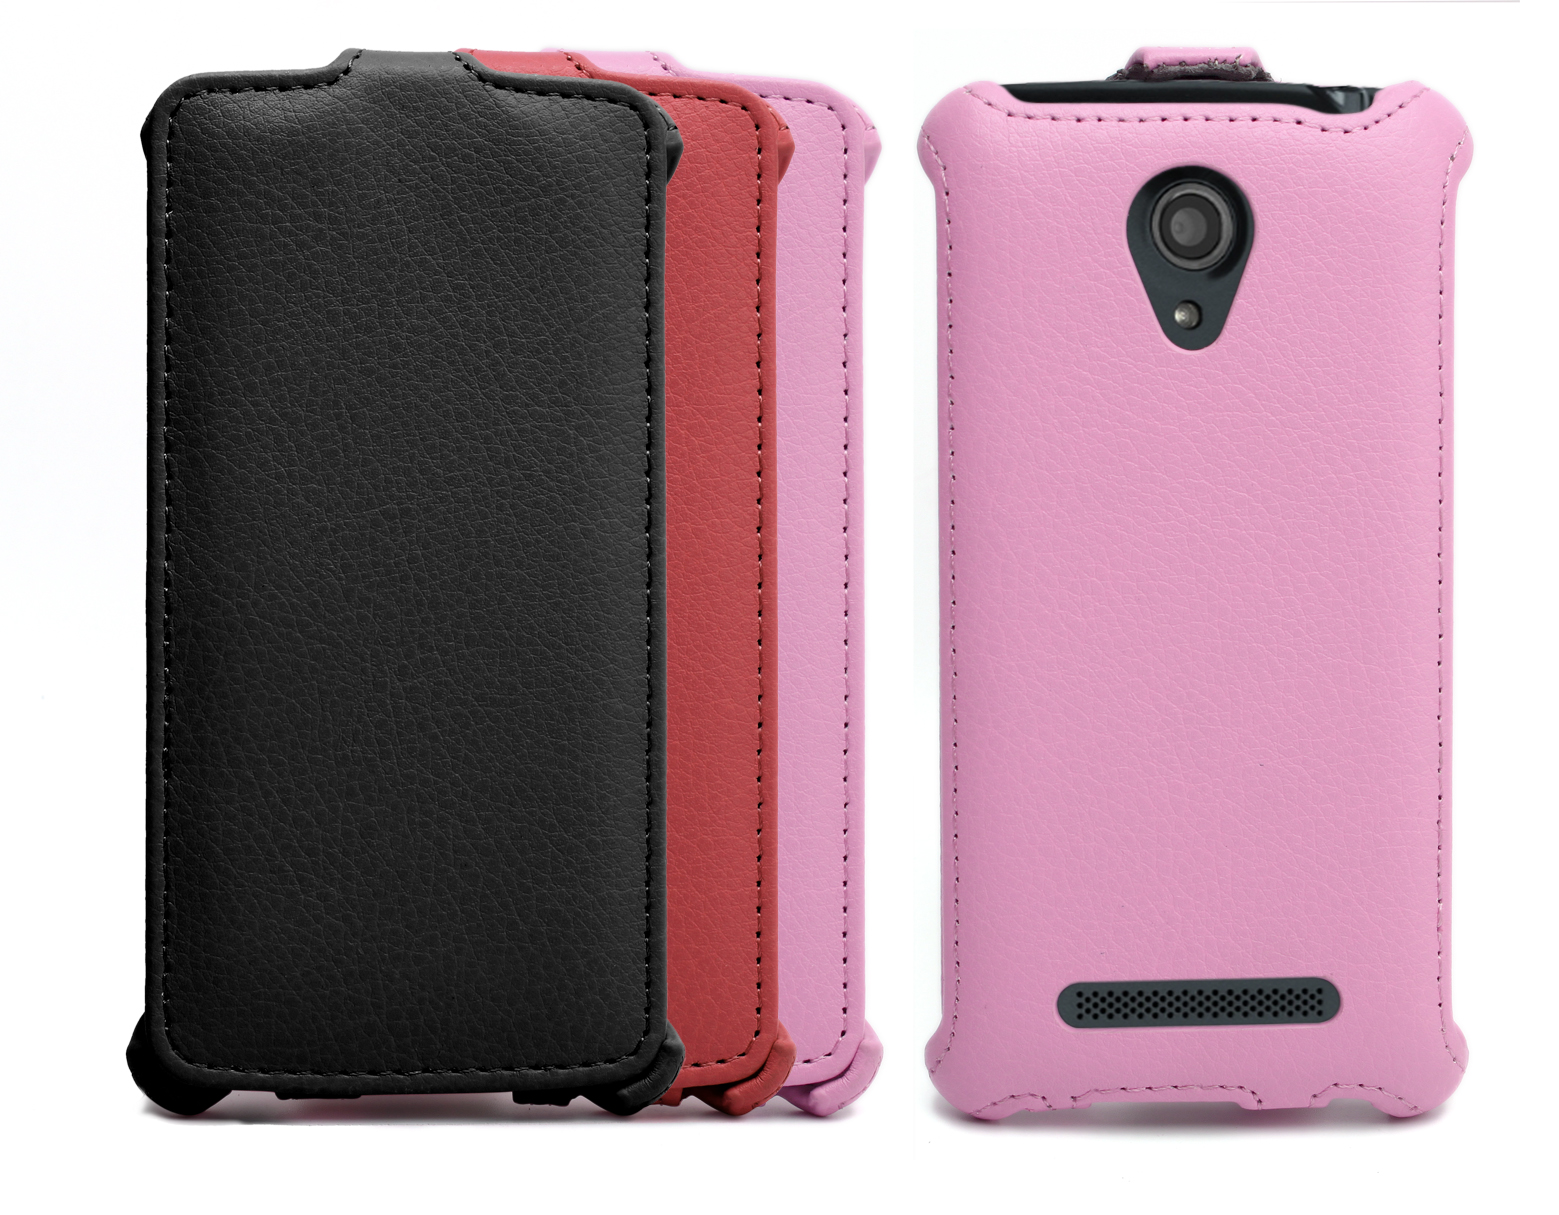 New design case for Fly IQ447 Era Life 1, hot new products for 2014